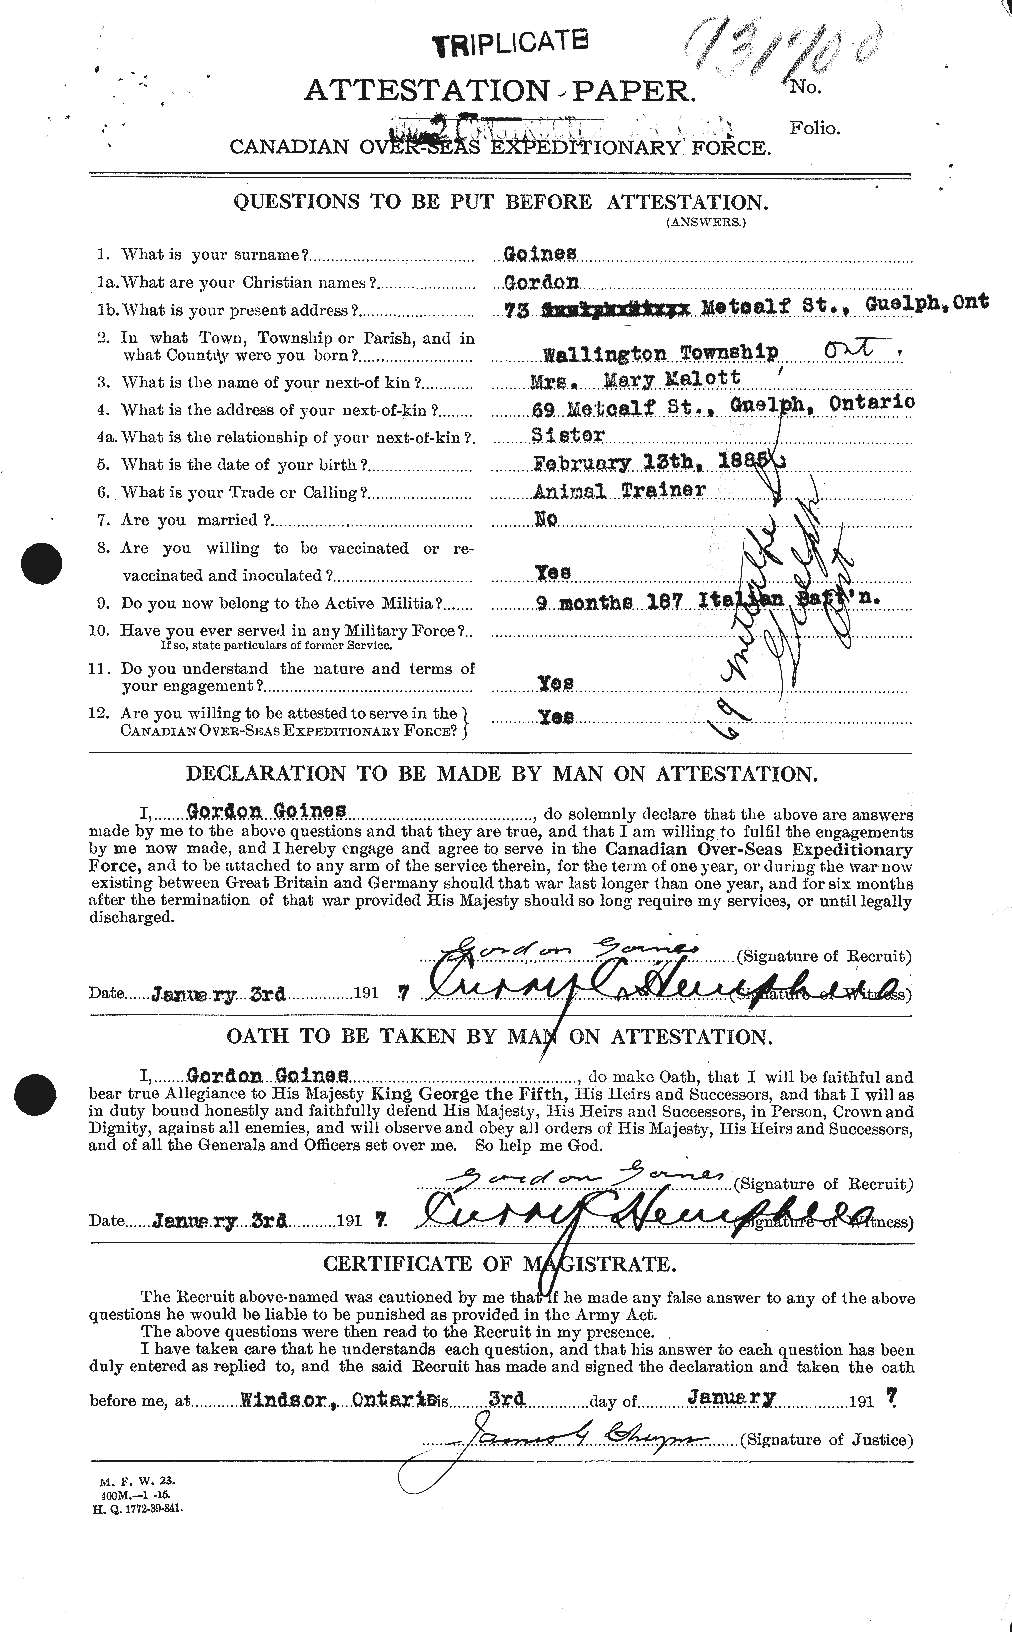 Personnel Records of the First World War - CEF 352154a